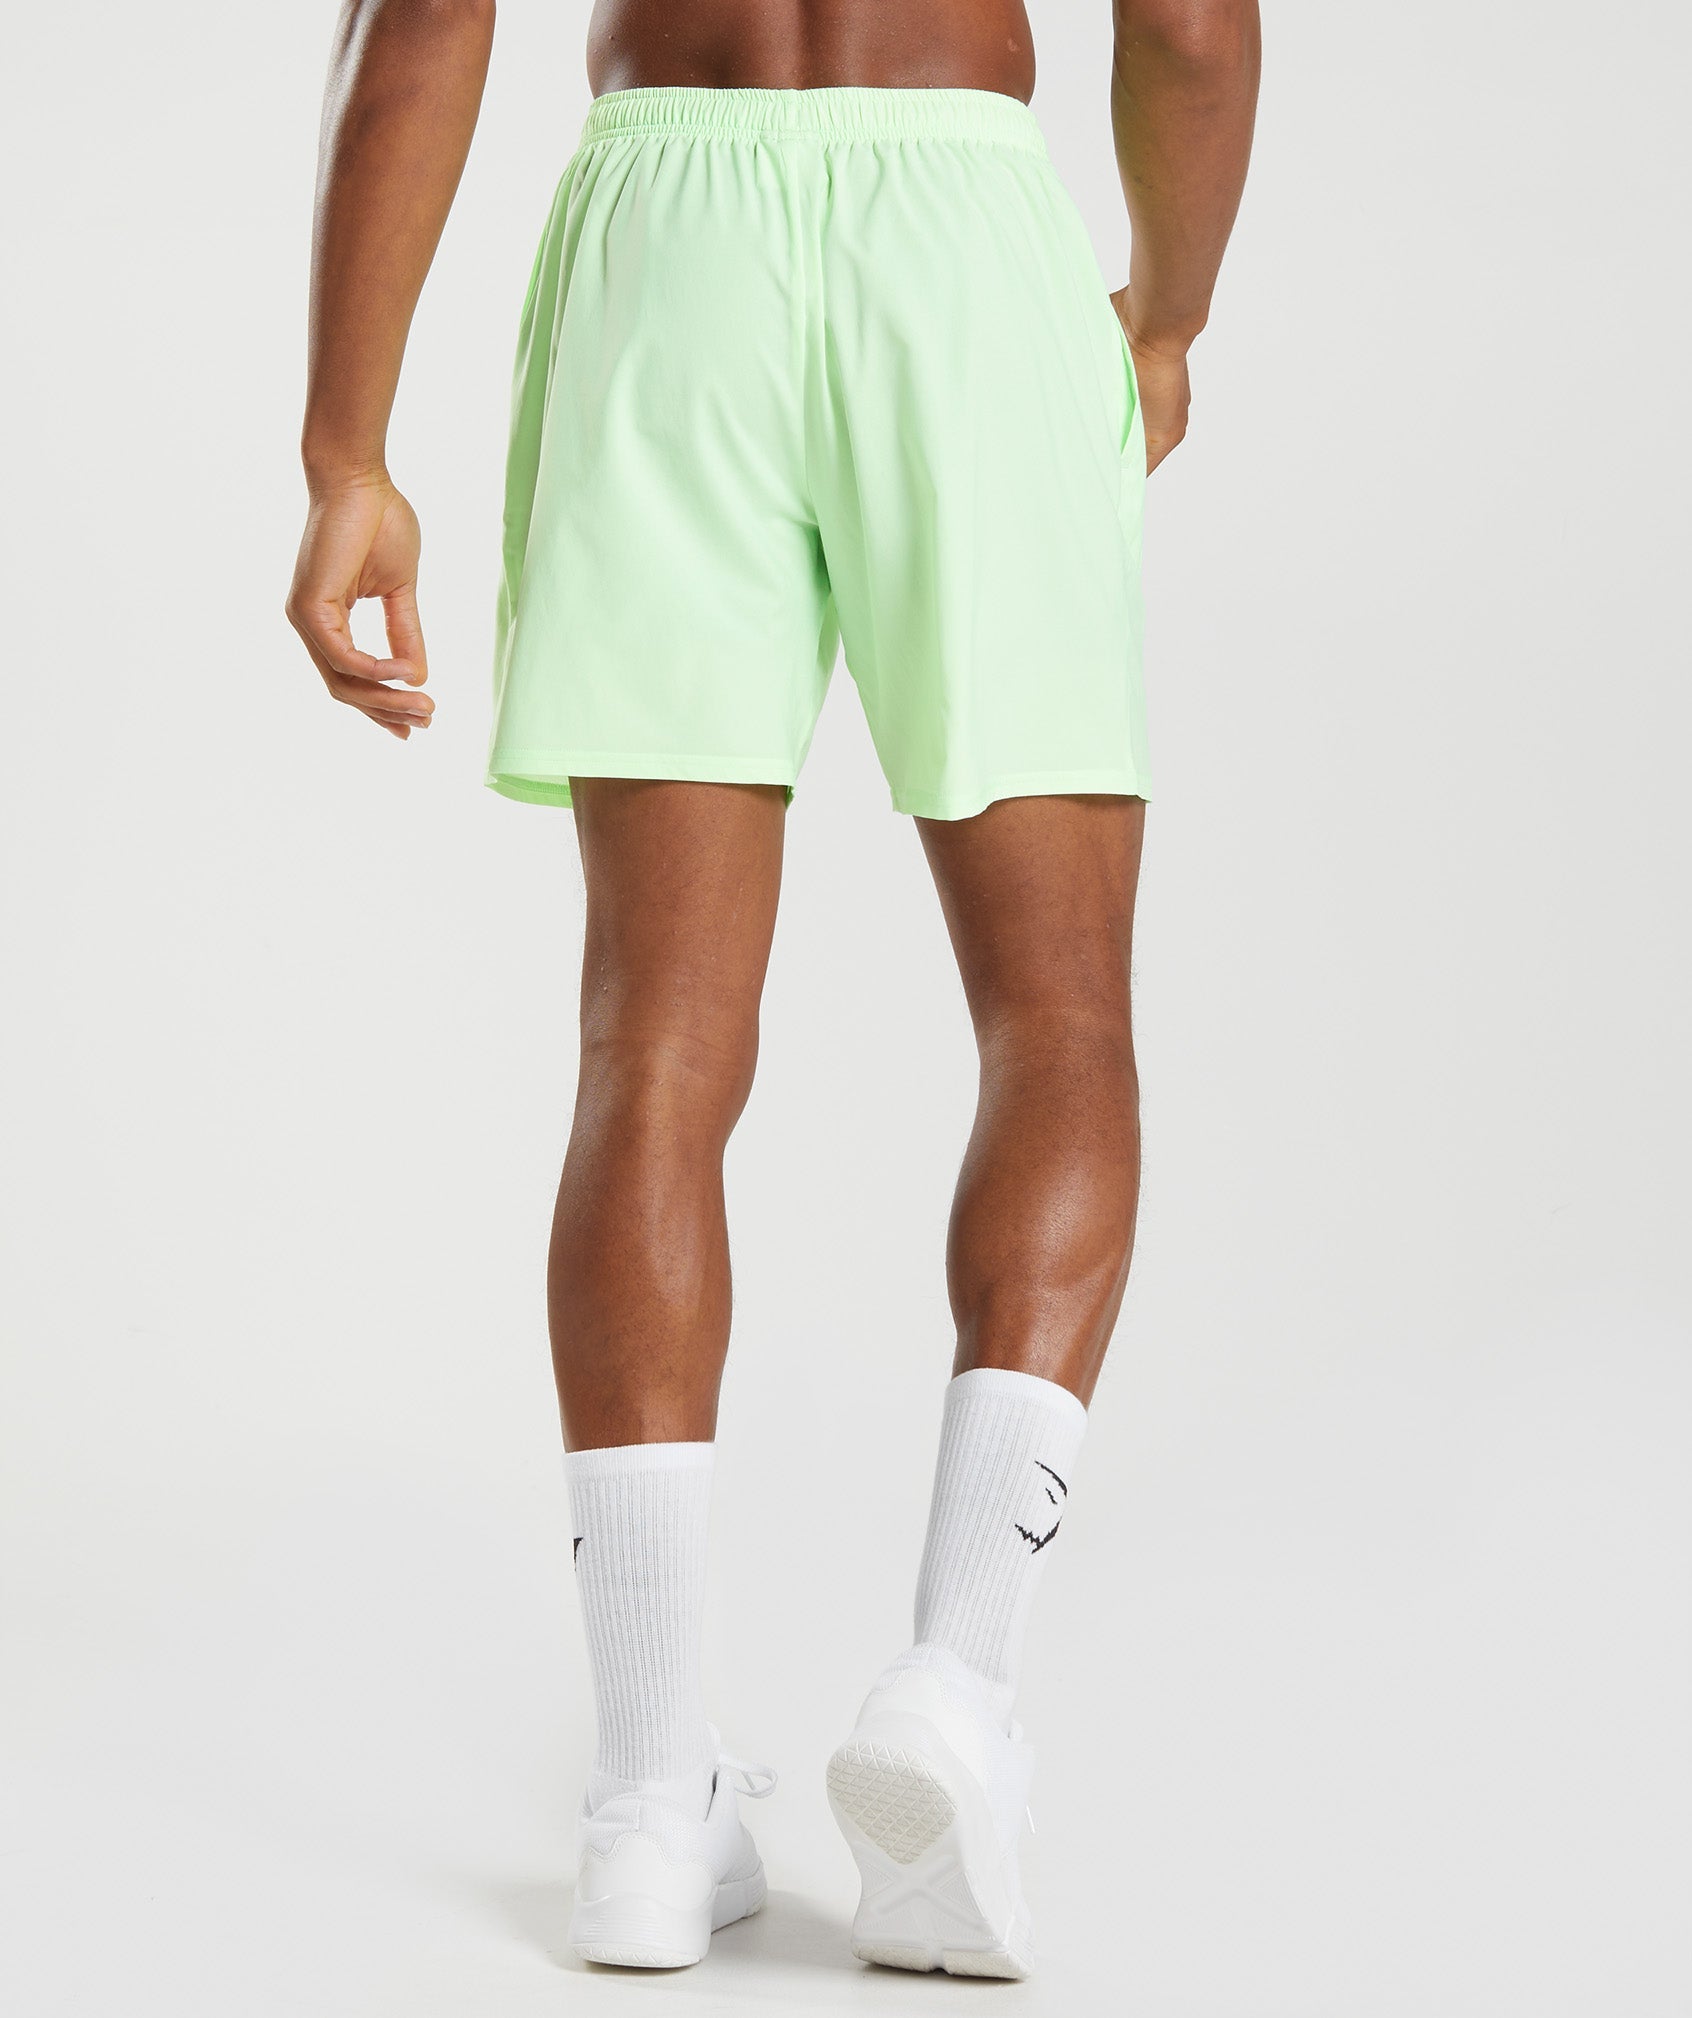 Arrival 7" Shorts in Fluo Mint - view 2